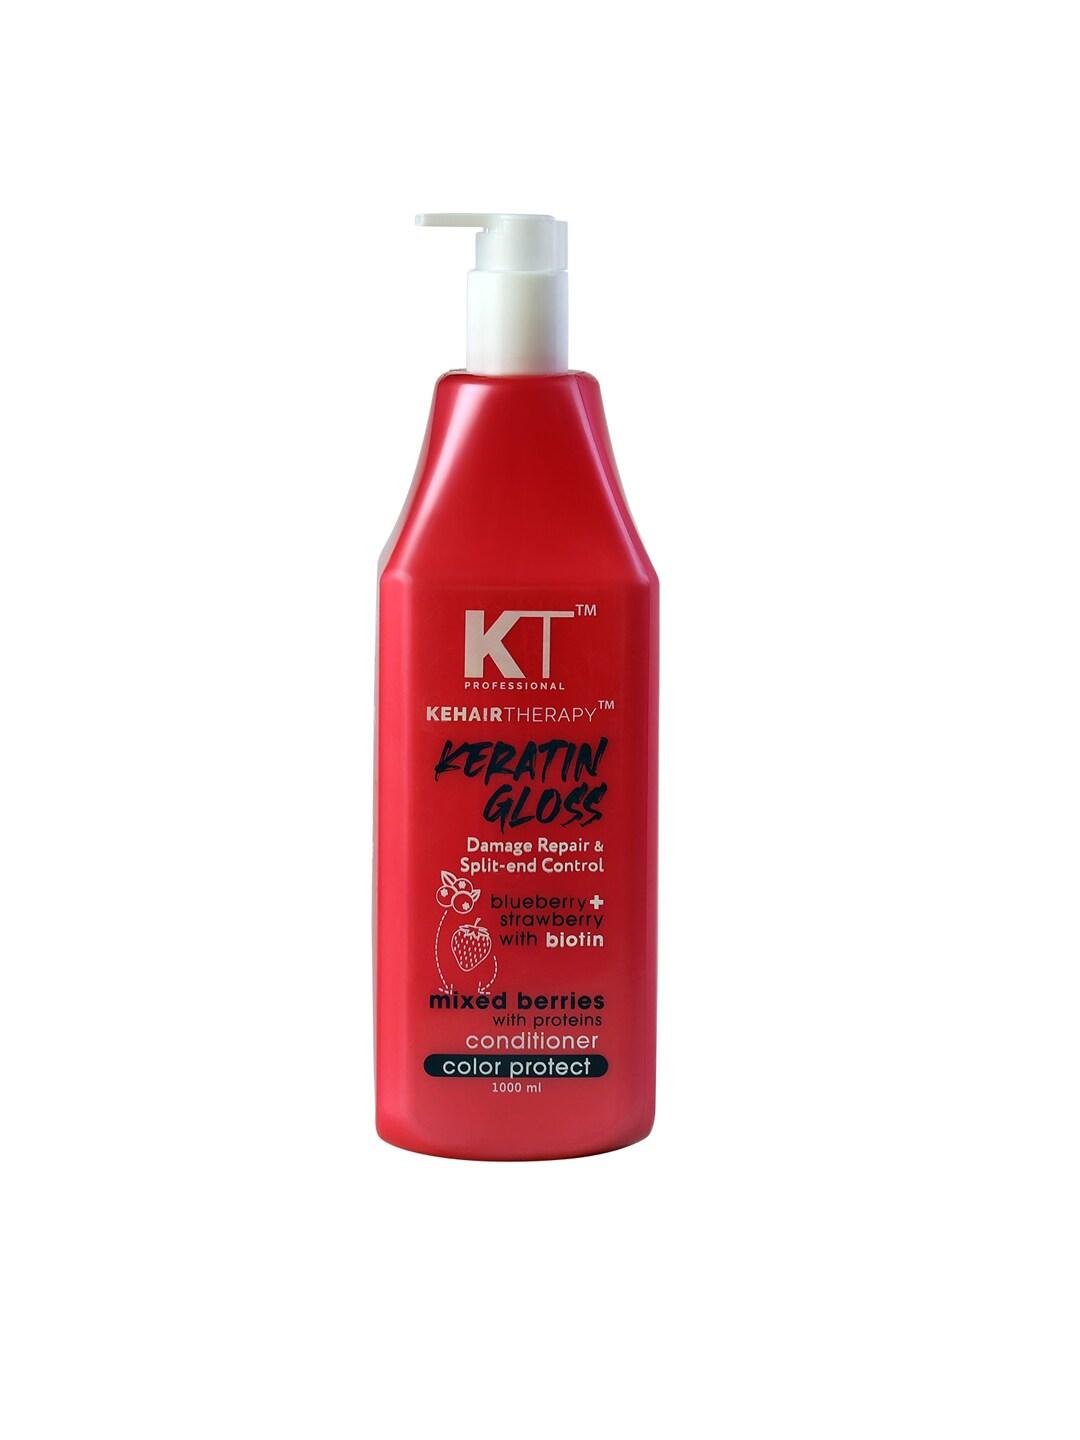 KEHAIRTHERAPY Professional Keratin Gloss Damage Repair Color Protect Conditioner- 1000ml